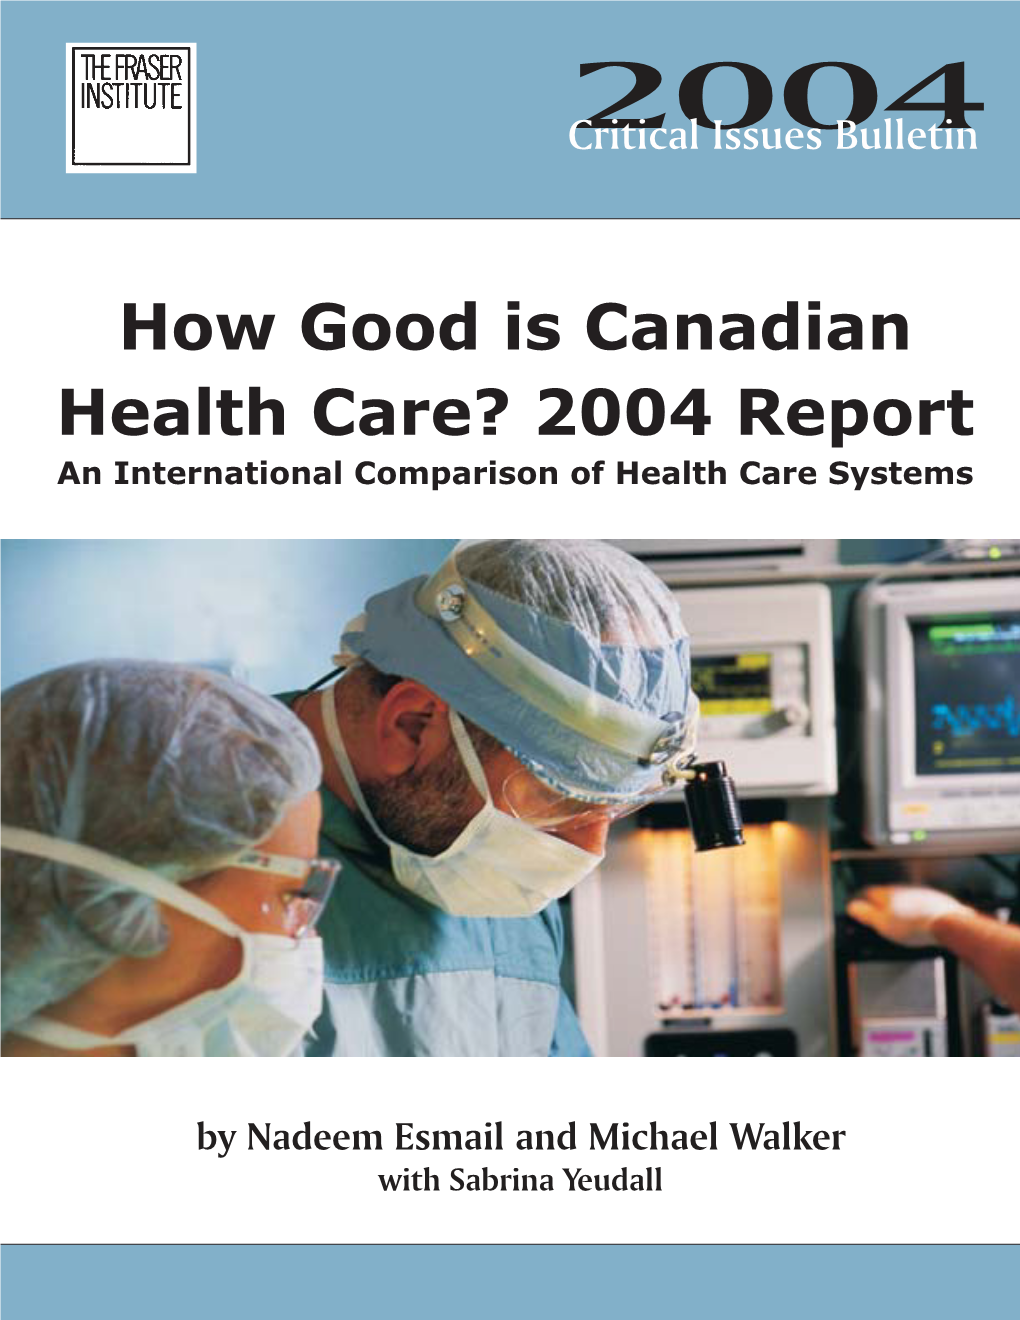 How Good Is Canadian Health Care? 2004 Report an International Comparison of Health Care Systems